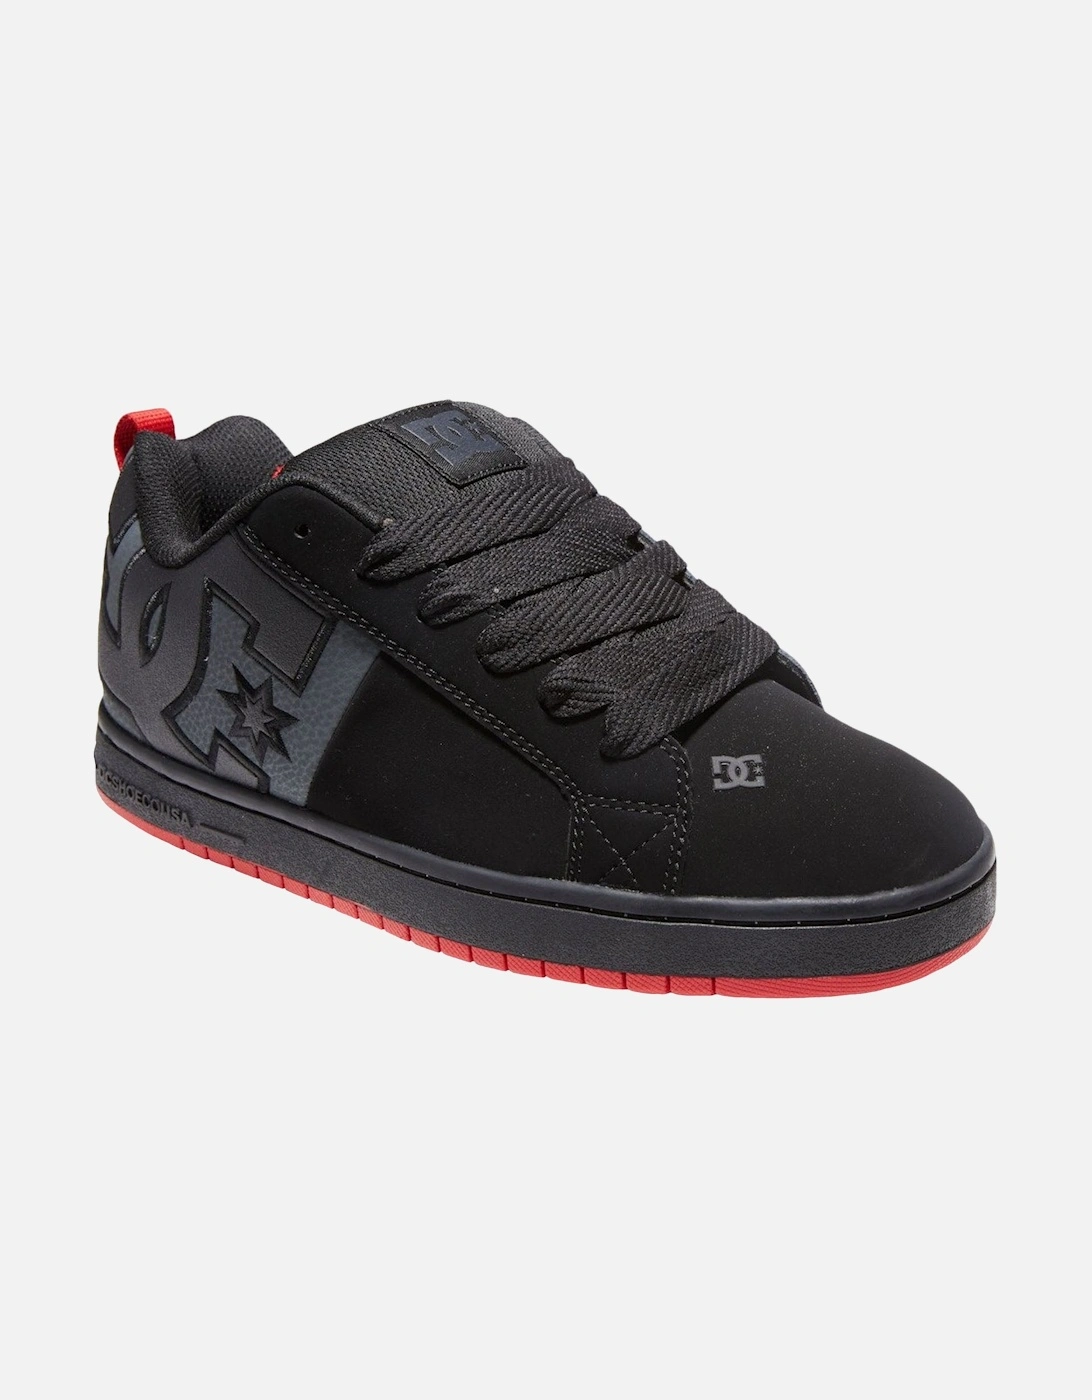 Mens Court Graffik Suede Trainers - Black/Grey/Red, 5 of 4